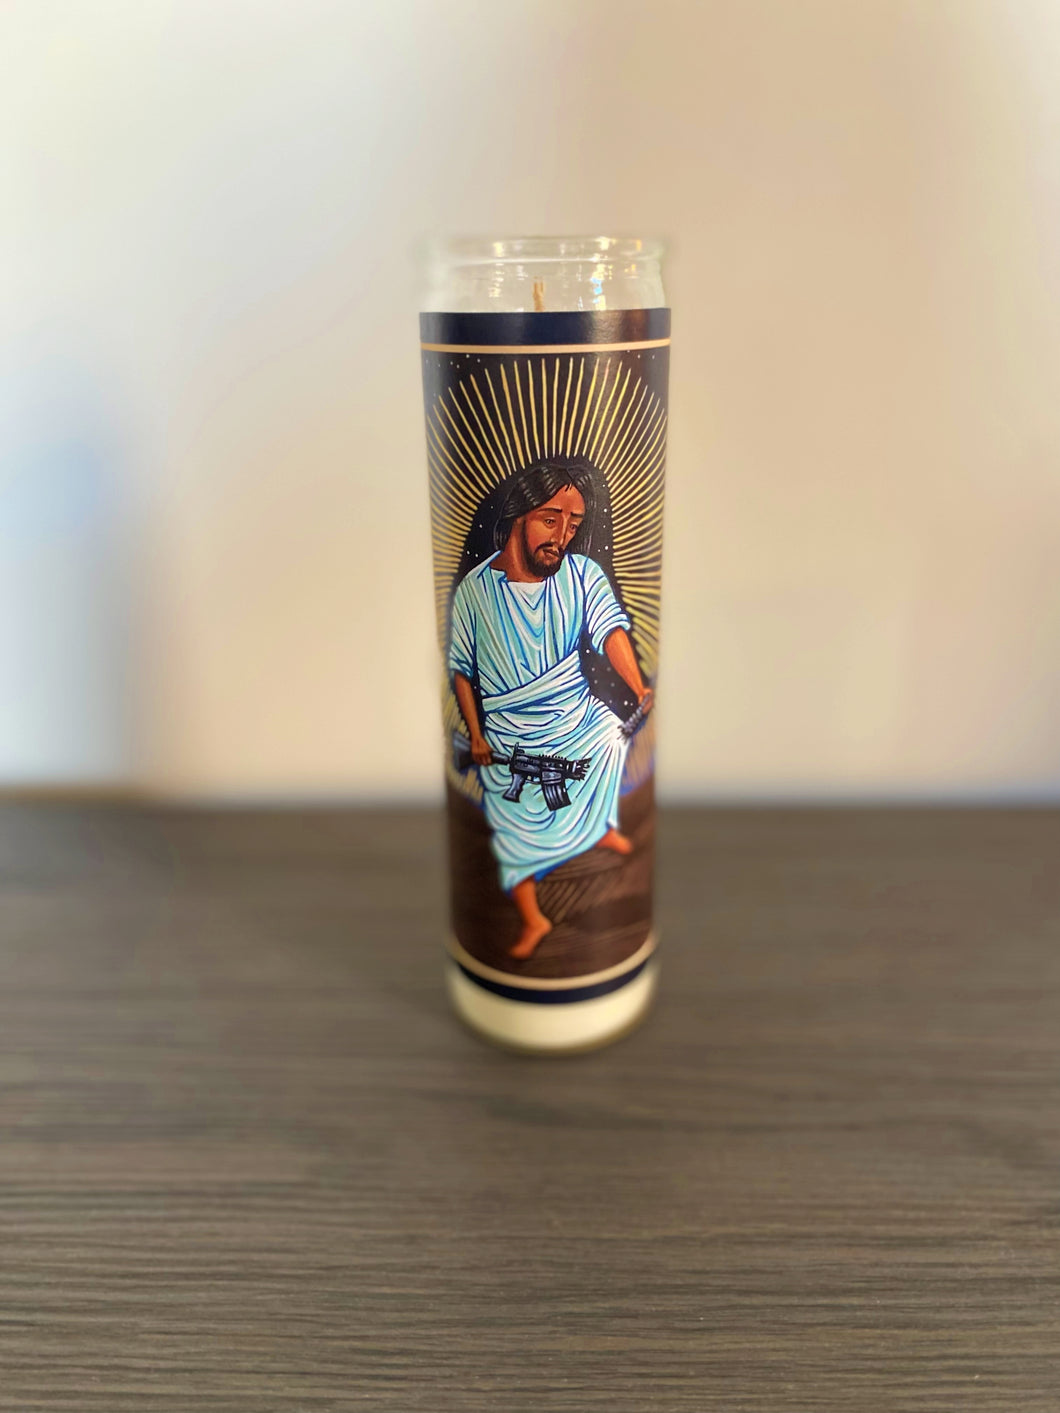 Christ Breaks the Rifle Prayer Candle